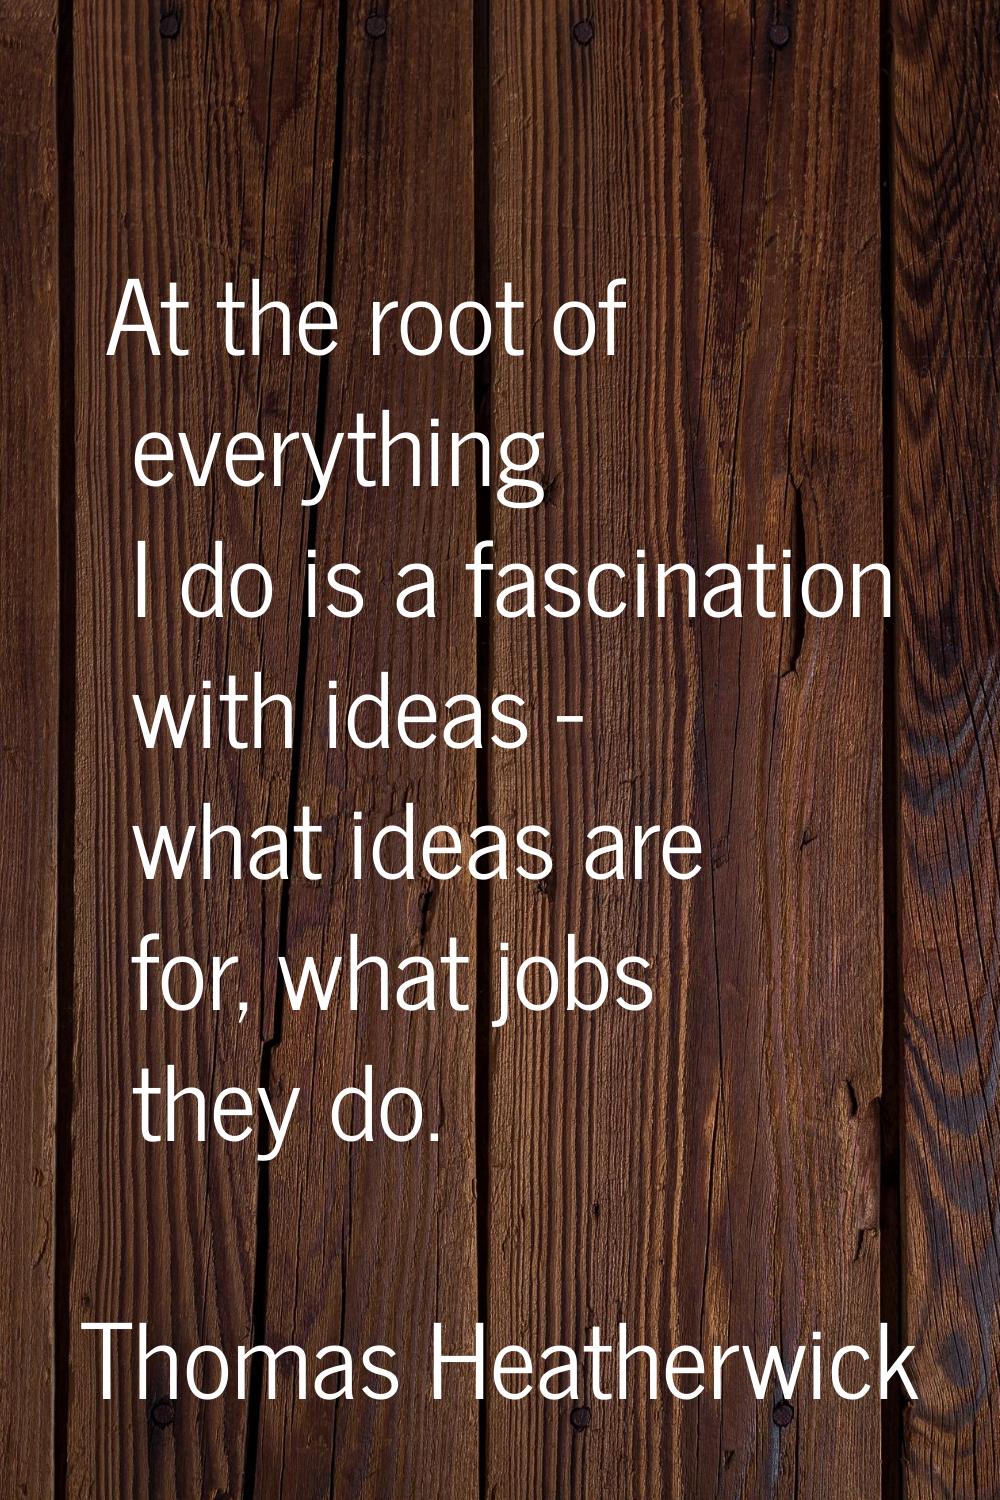 At the root of everything I do is a fascination with ideas - what ideas are for, what jobs they do.